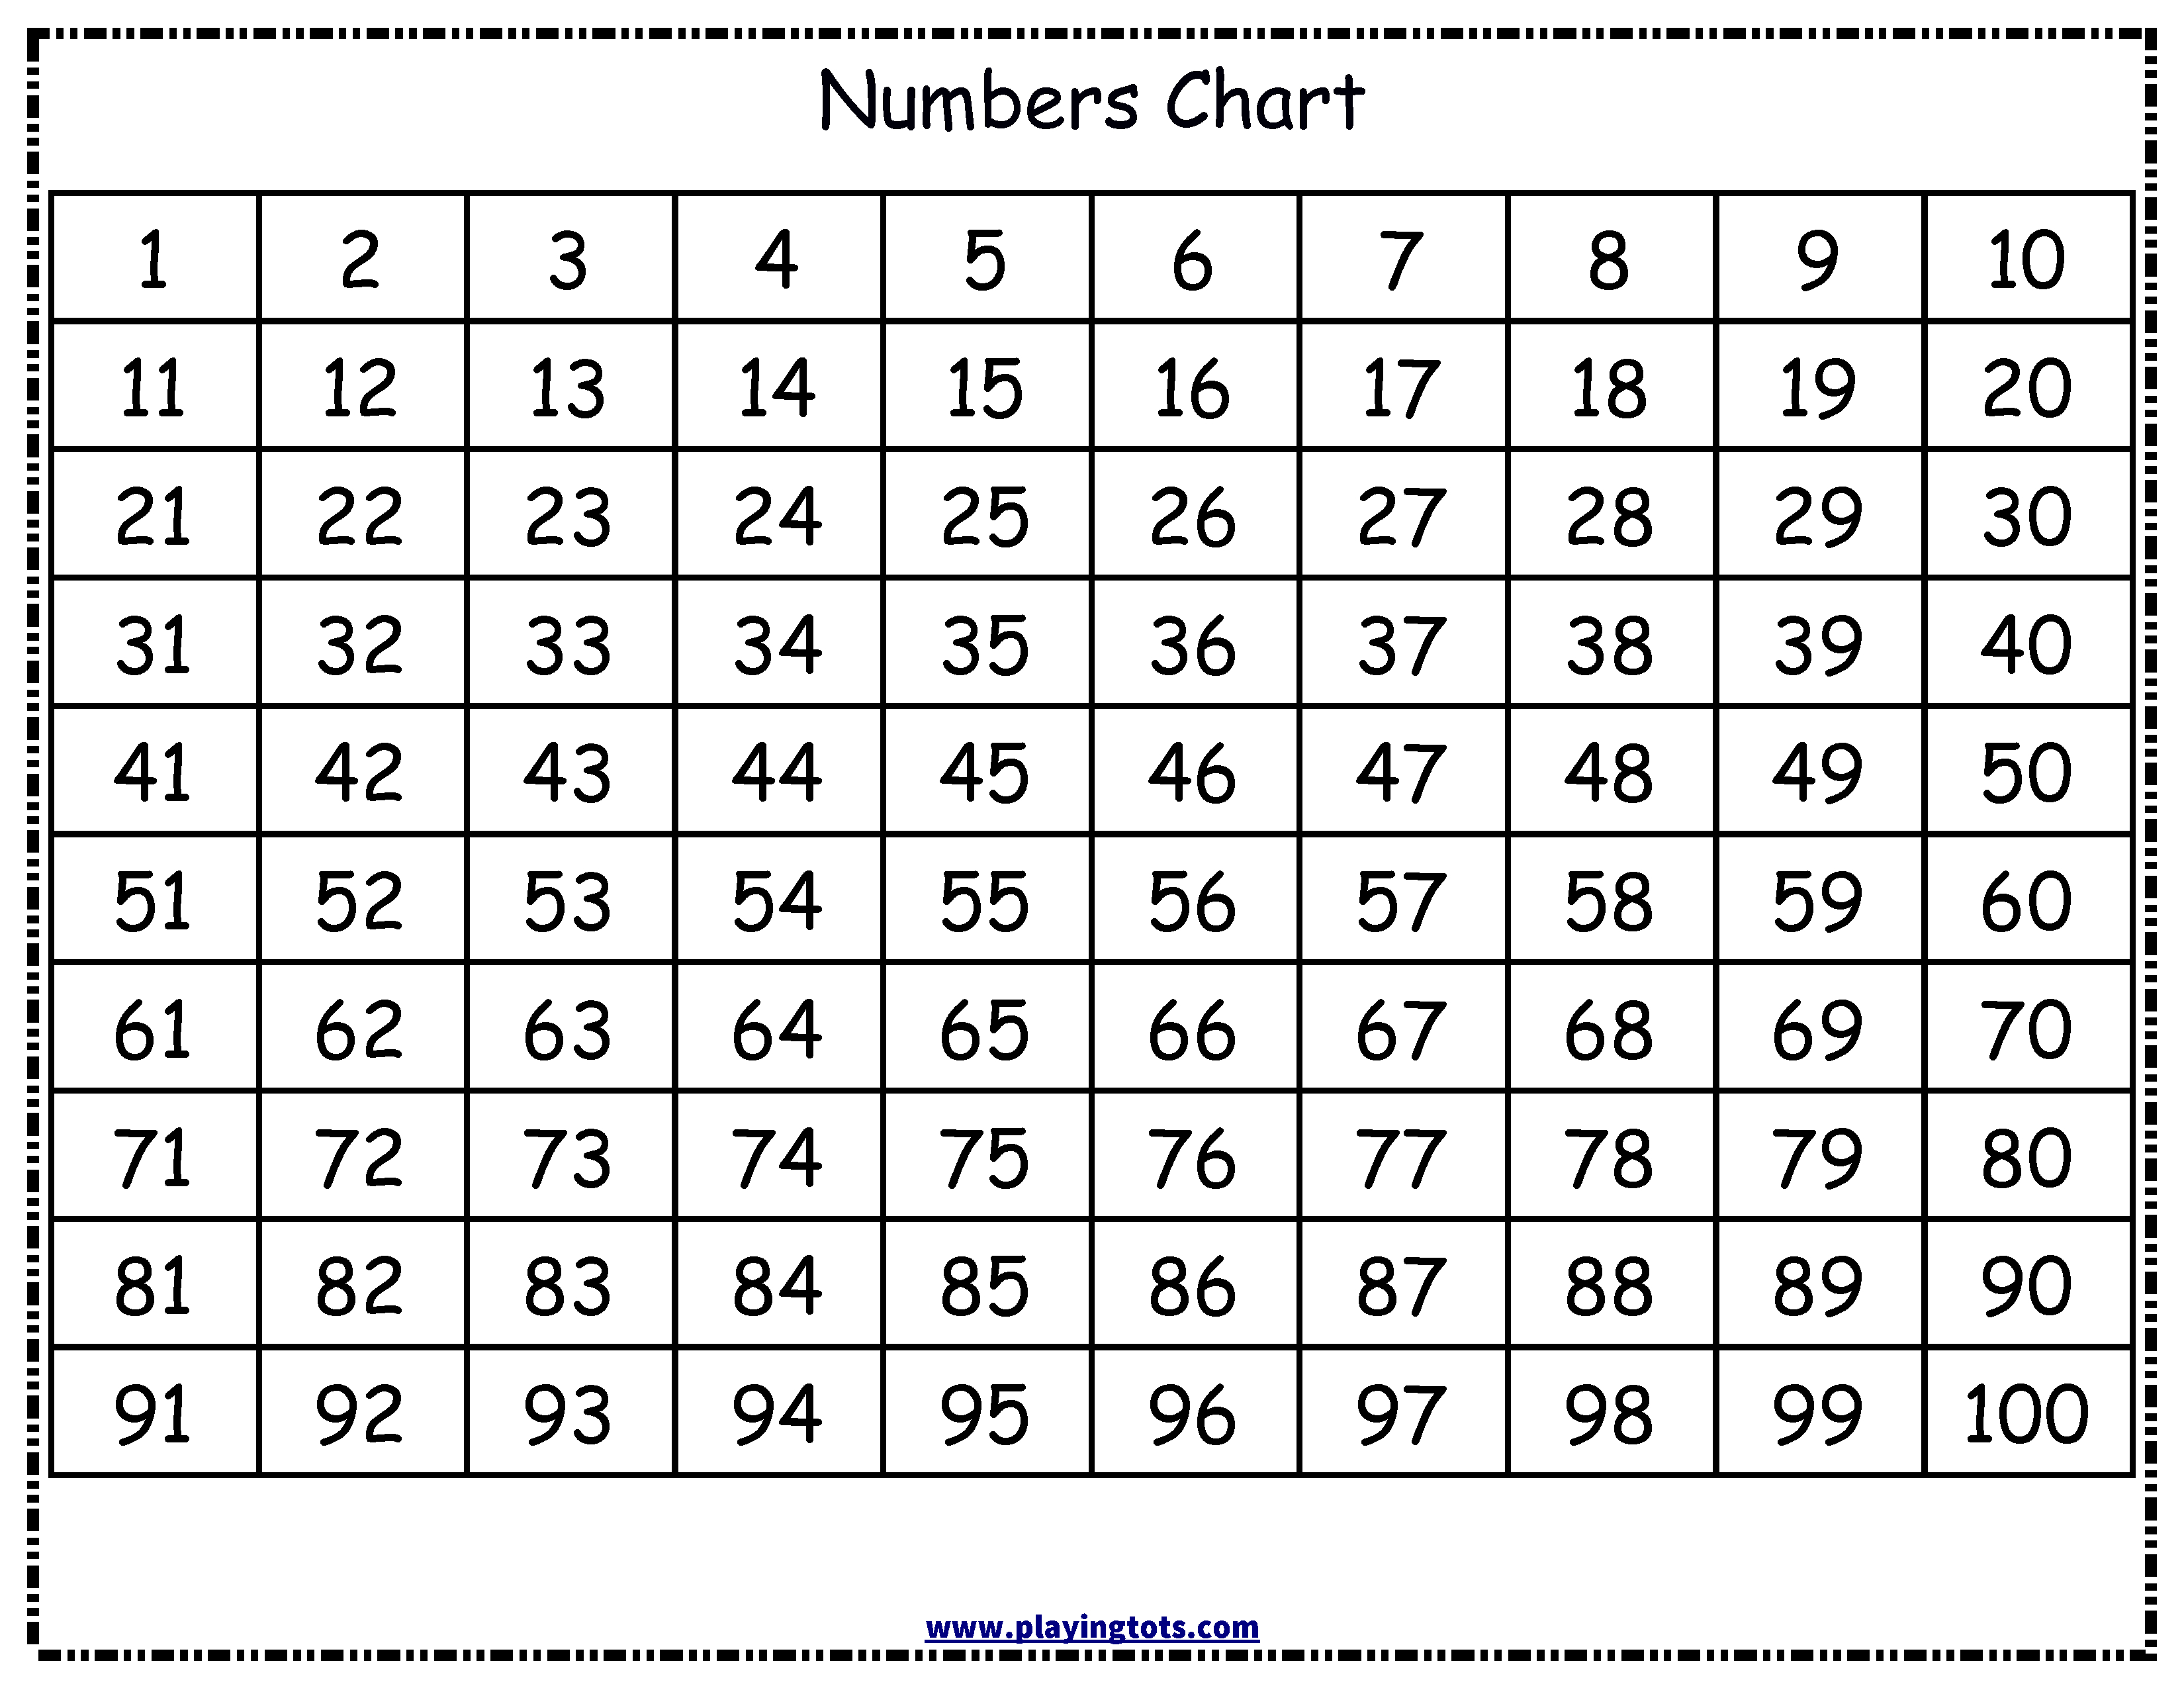 Free Printable Number Charts And 100Charts For Counting, Skip